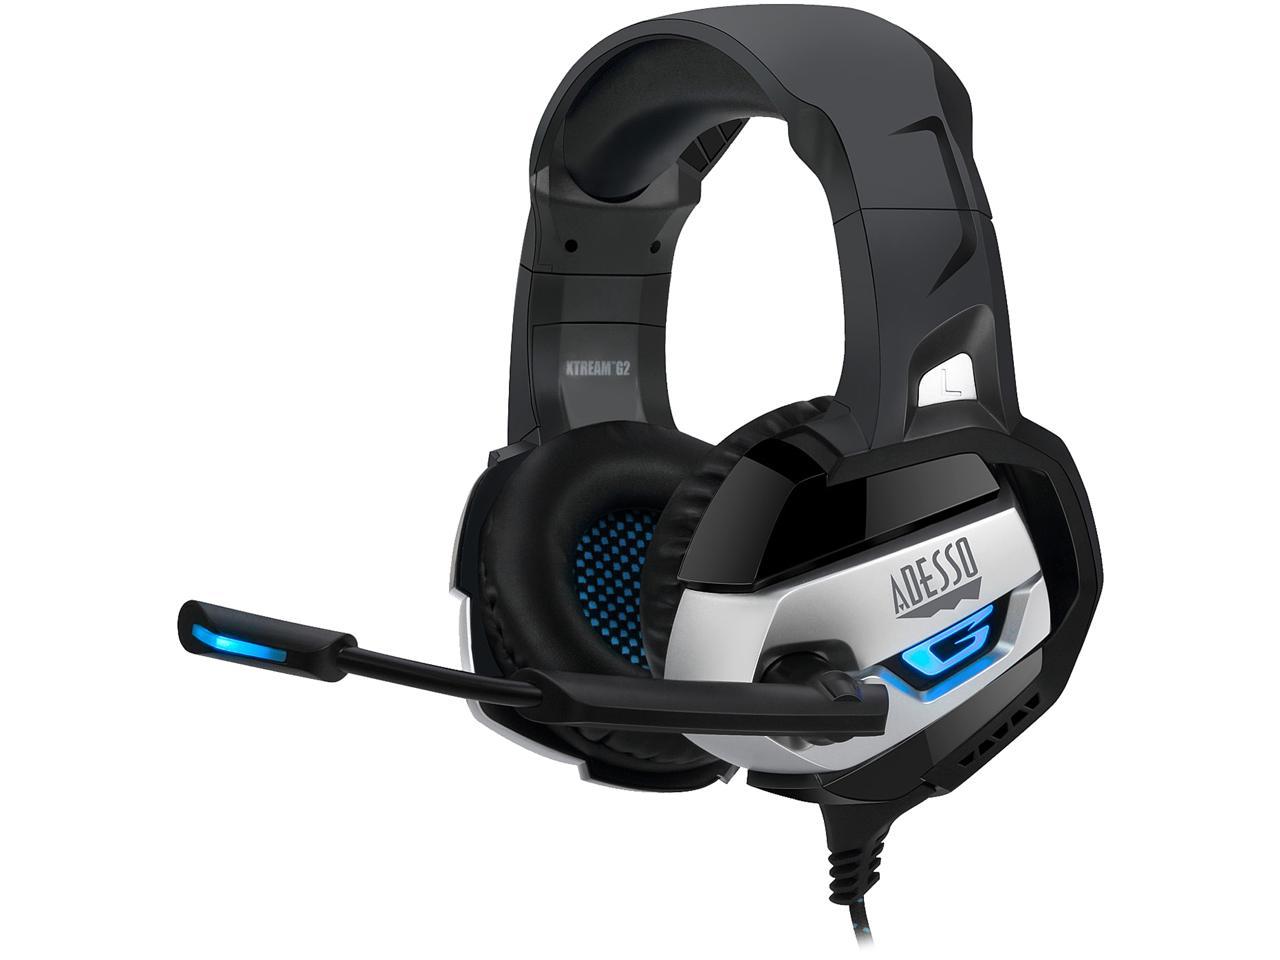 Adesso Xtream G2 Stereo USB Gaming Headphone/Headset with Microphone